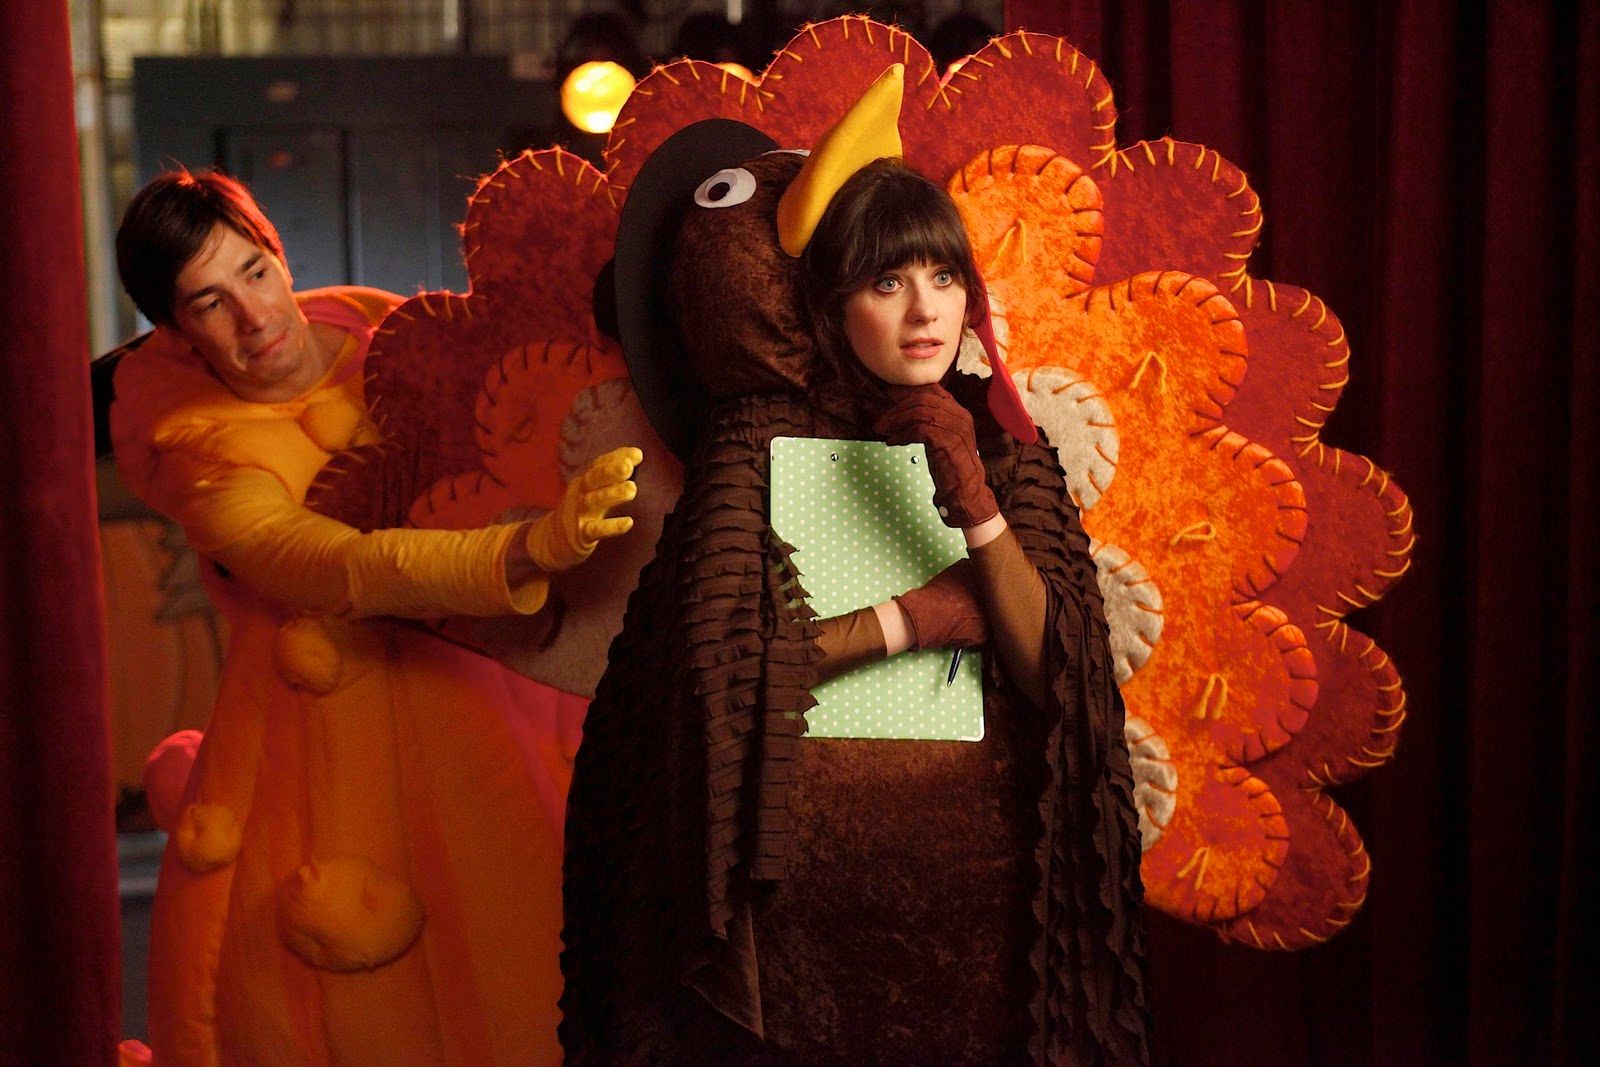 Paul and Jess Thanksgiving on New Girl